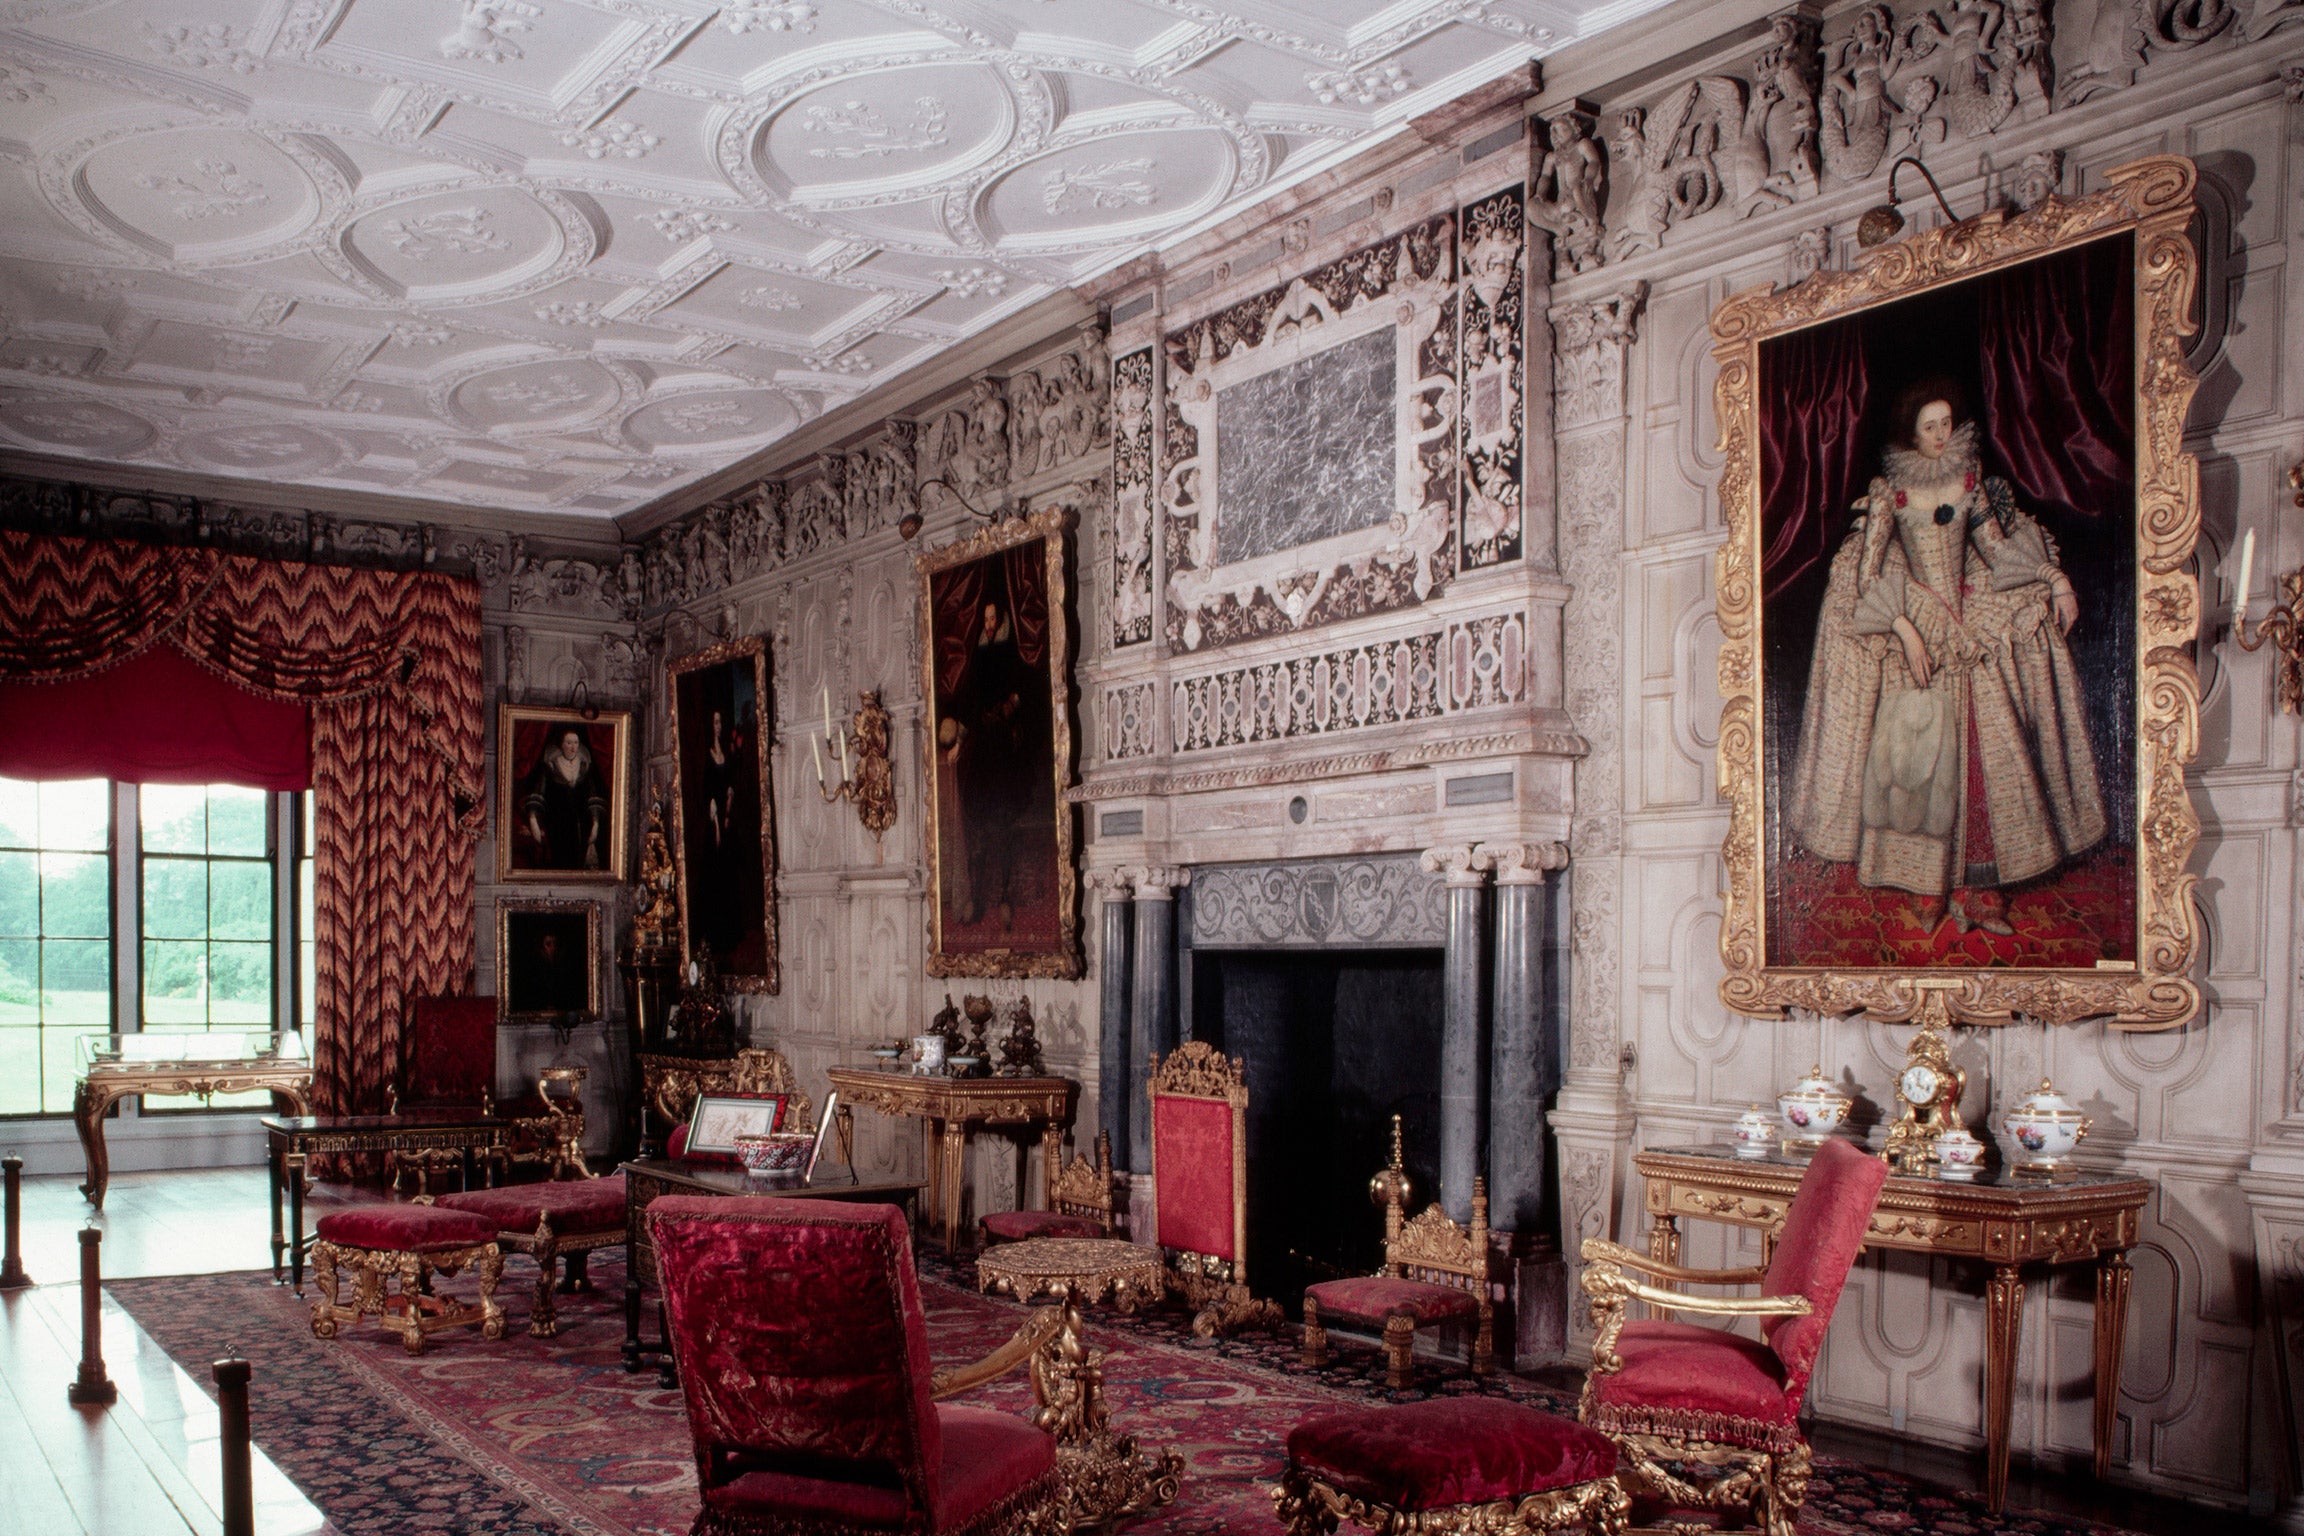 The Sitting Room at Knole House in Kent